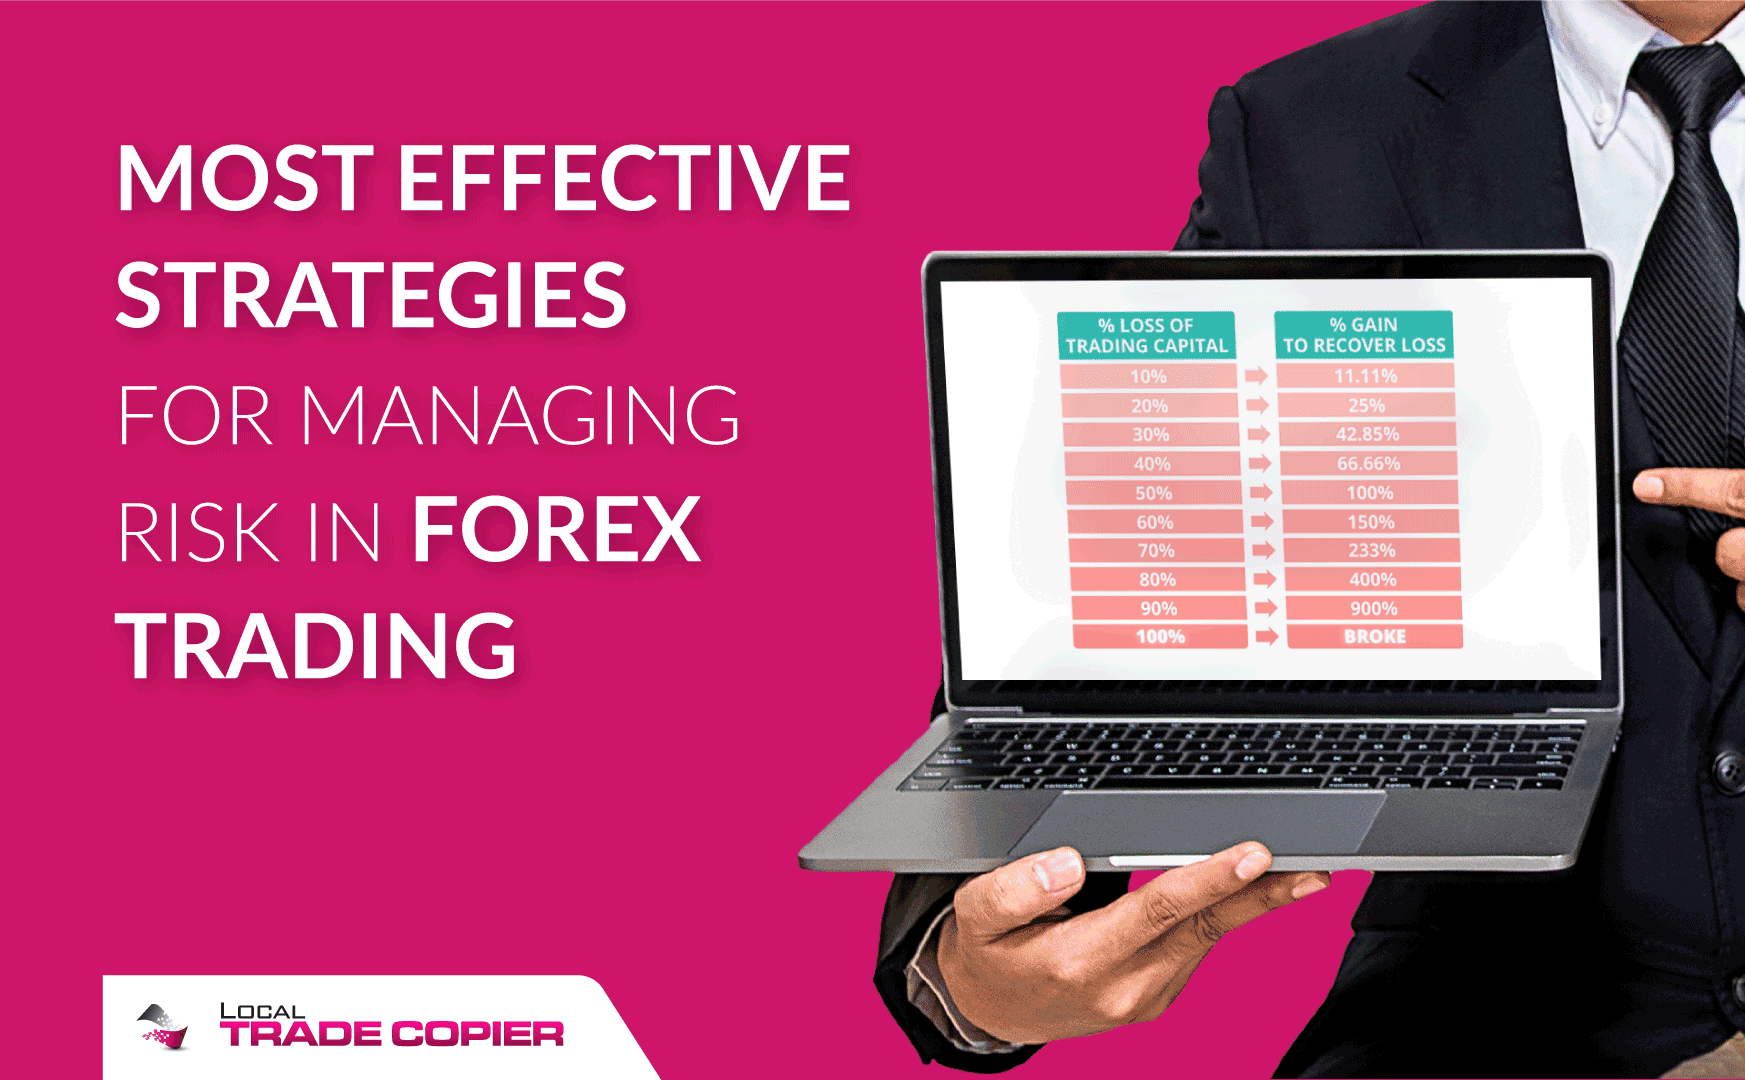 Most Effective Strategies for Managing Risk in Forex Trading